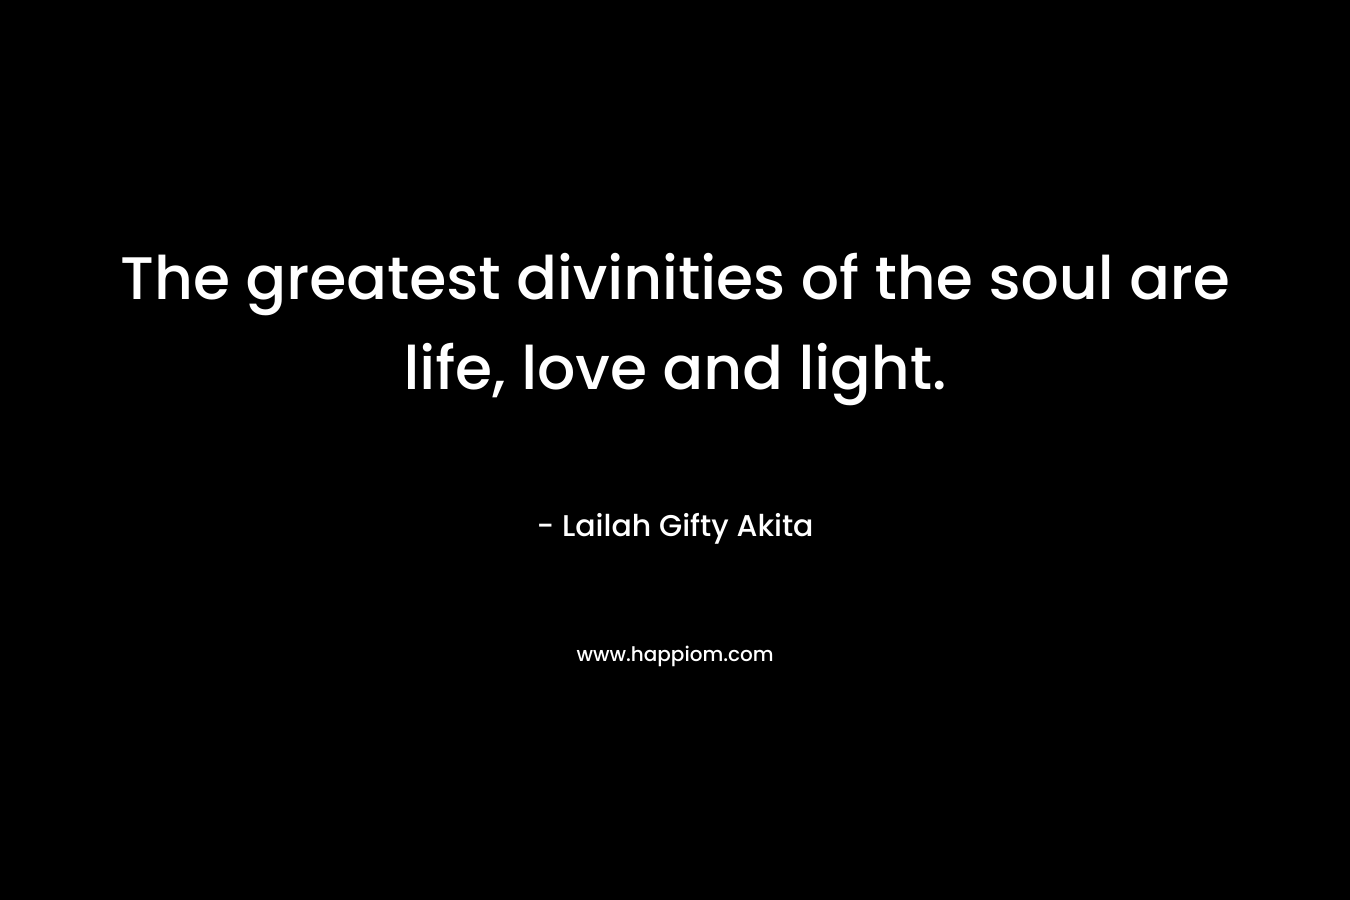 The greatest divinities of the soul are life, love and light.